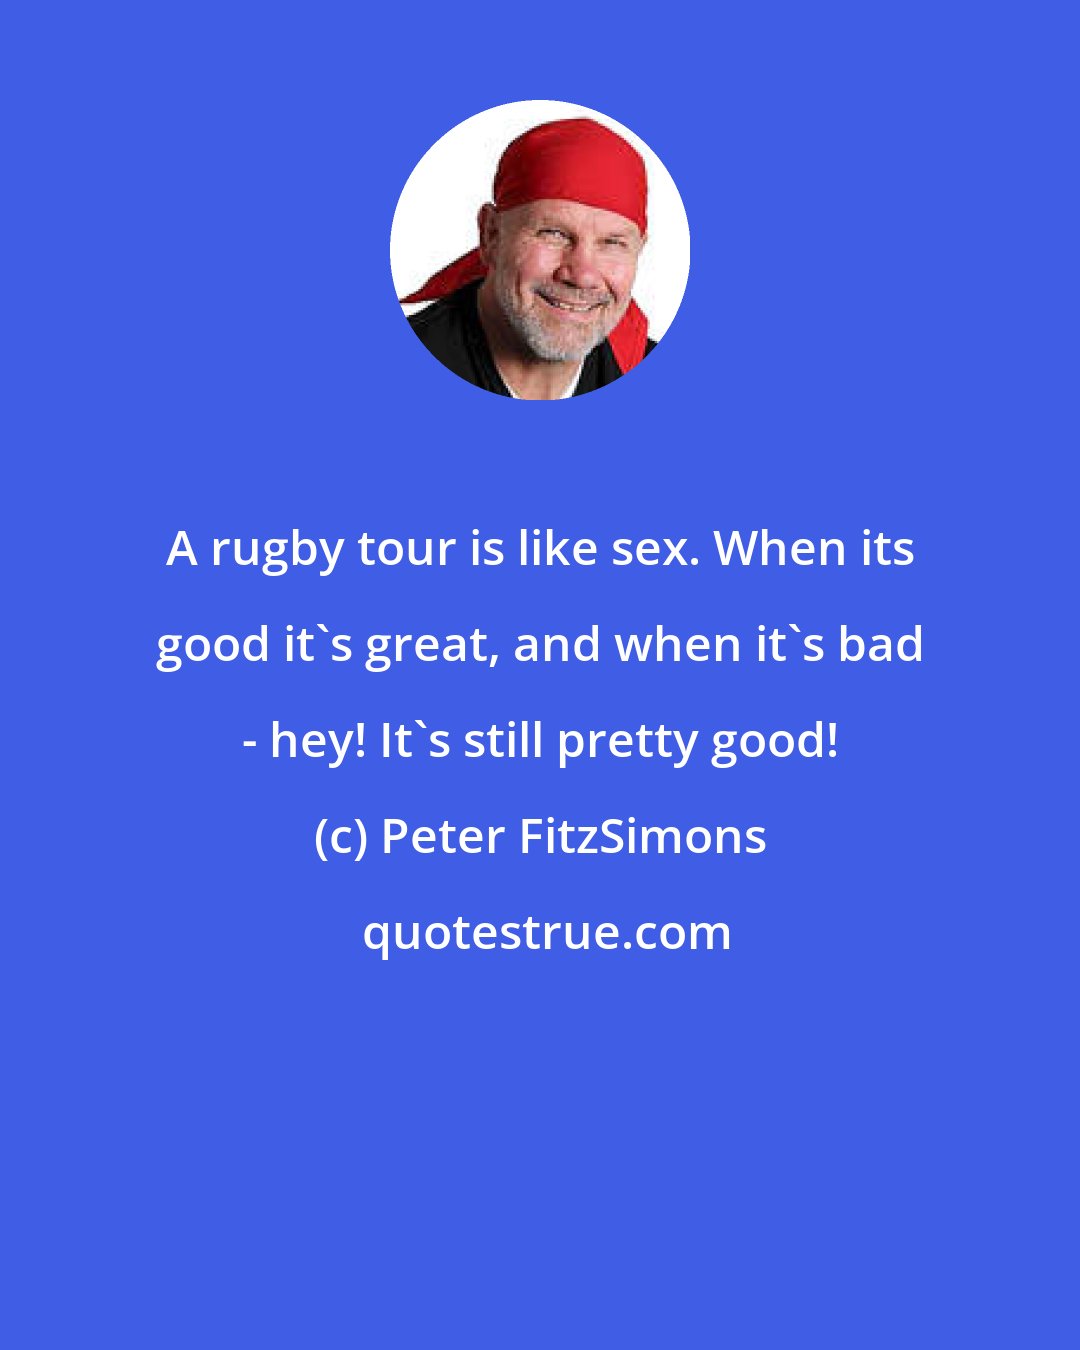 Peter FitzSimons: A rugby tour is like sex. When its good it's great, and when it's bad - hey! It's still pretty good!